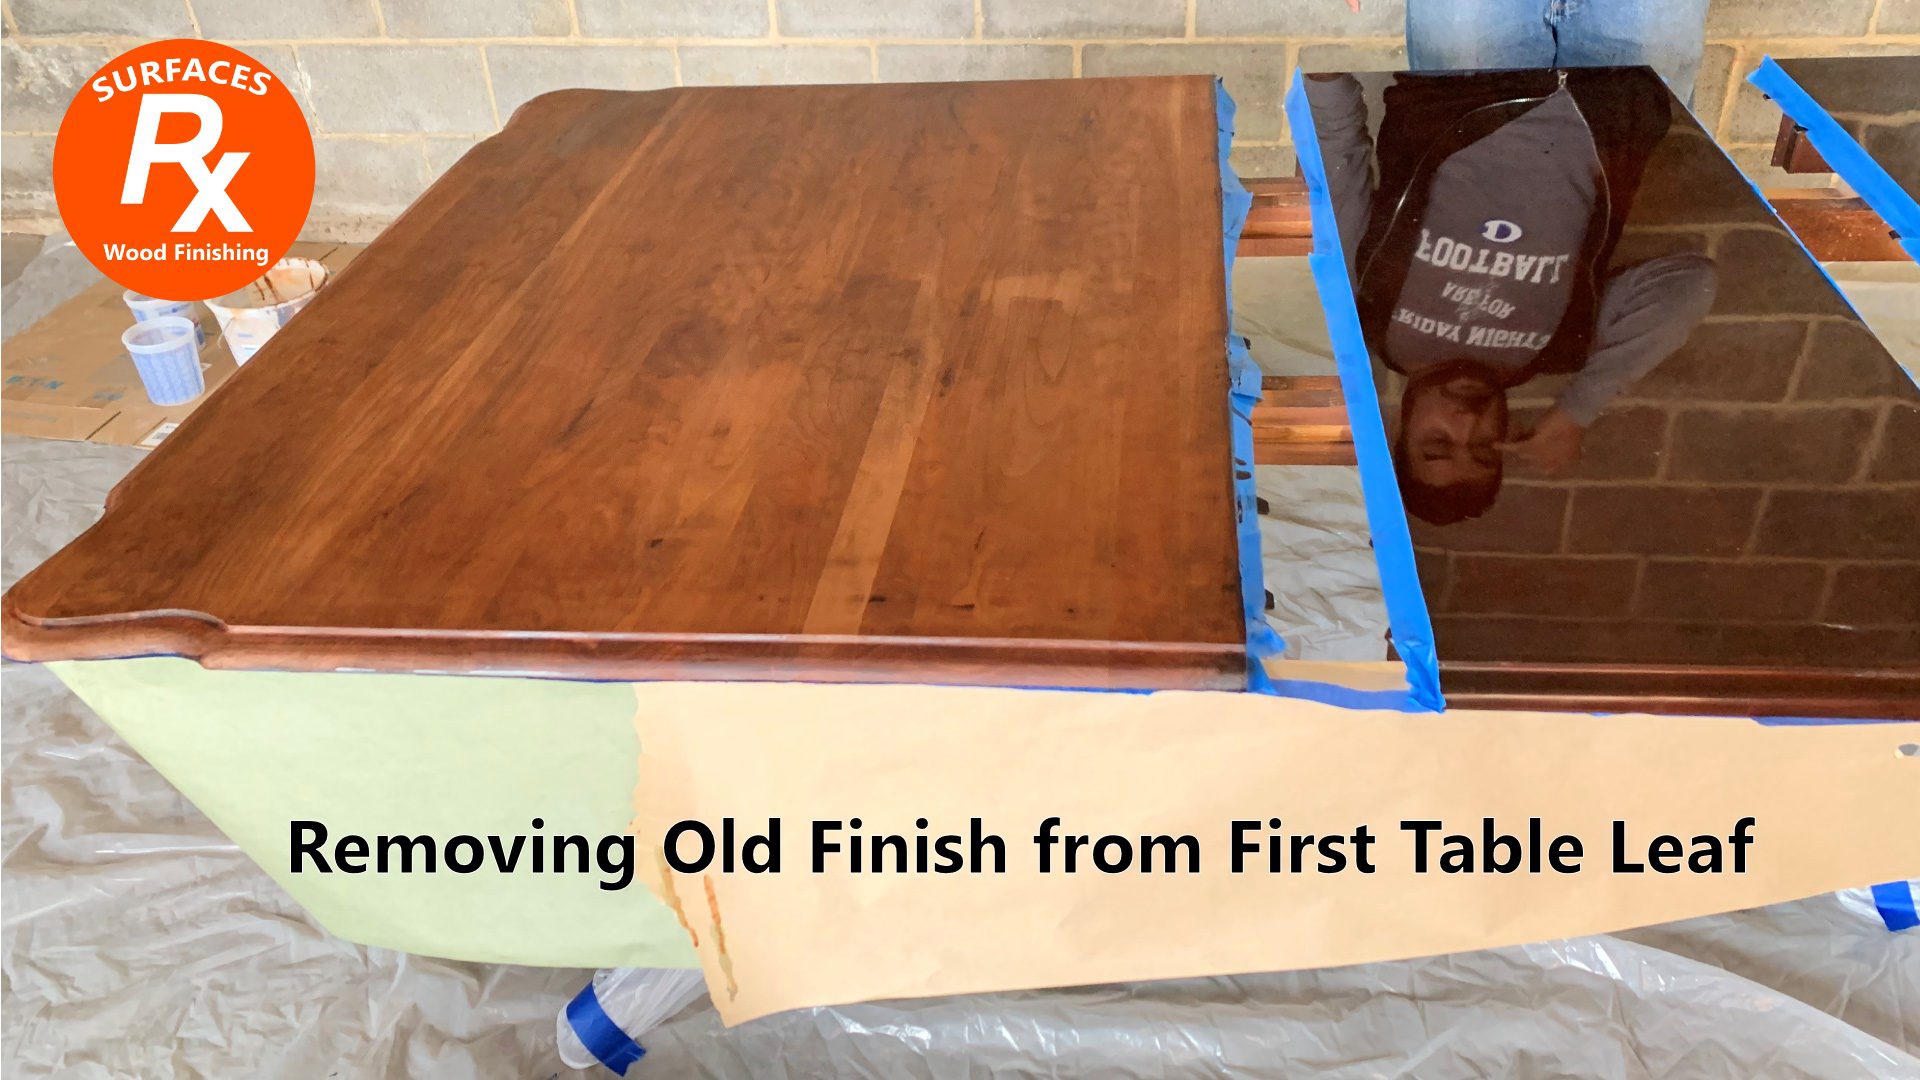 Dining Room Table Refinishing by Surfaces Rx Dallas TX